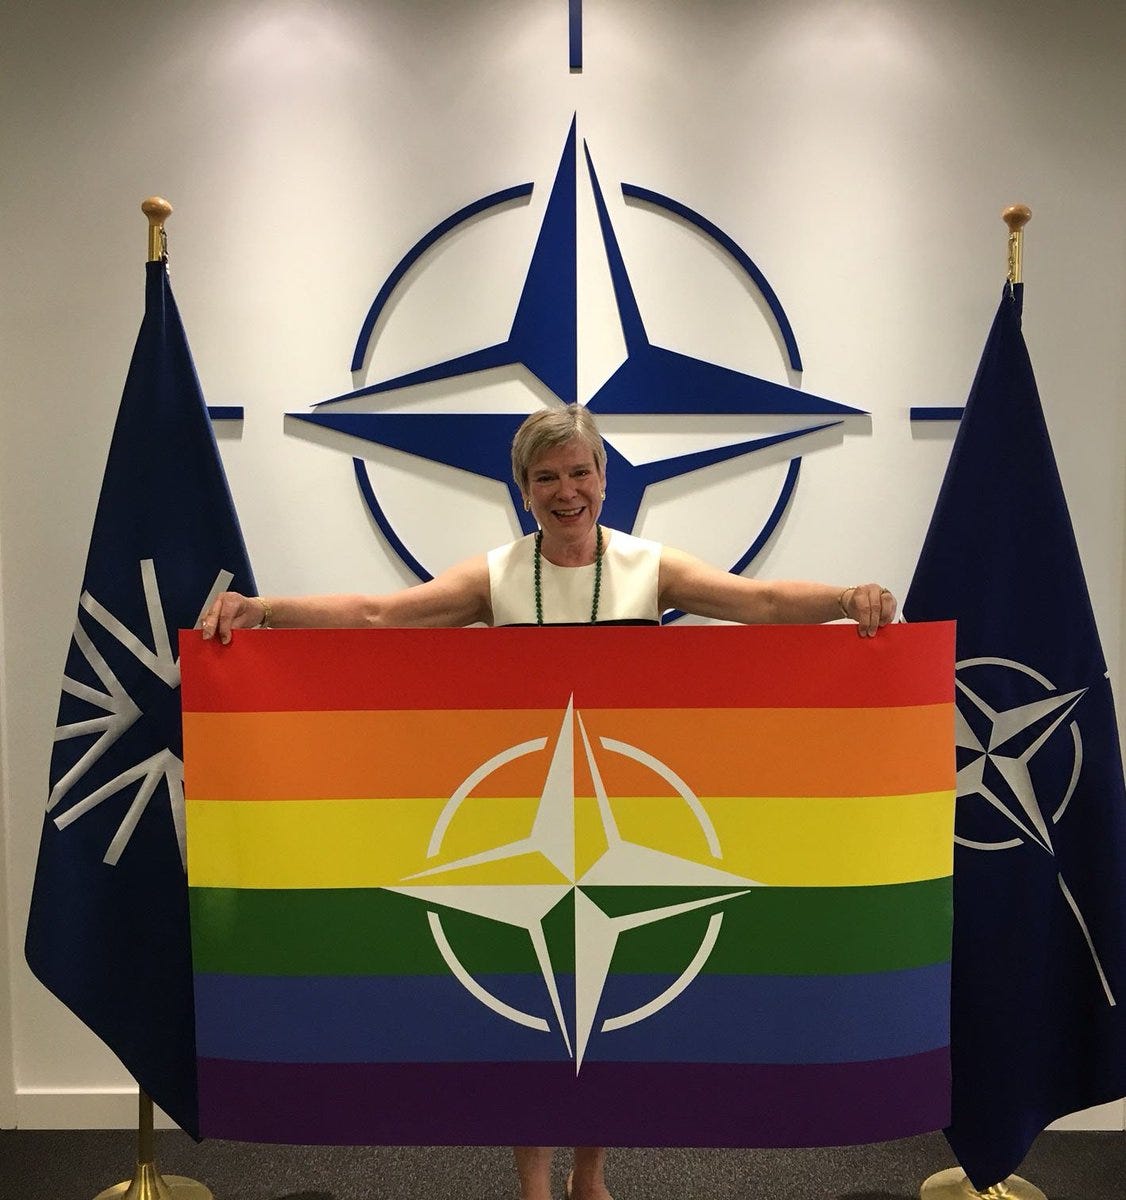 Rose Gottemoeller on X: "Proud to mark #IDAHOT2017 today. #NATO is  committed to diversity and inclusion - these values make us stronger and  safer. https://t.co/2Unp37Ec8N" / X